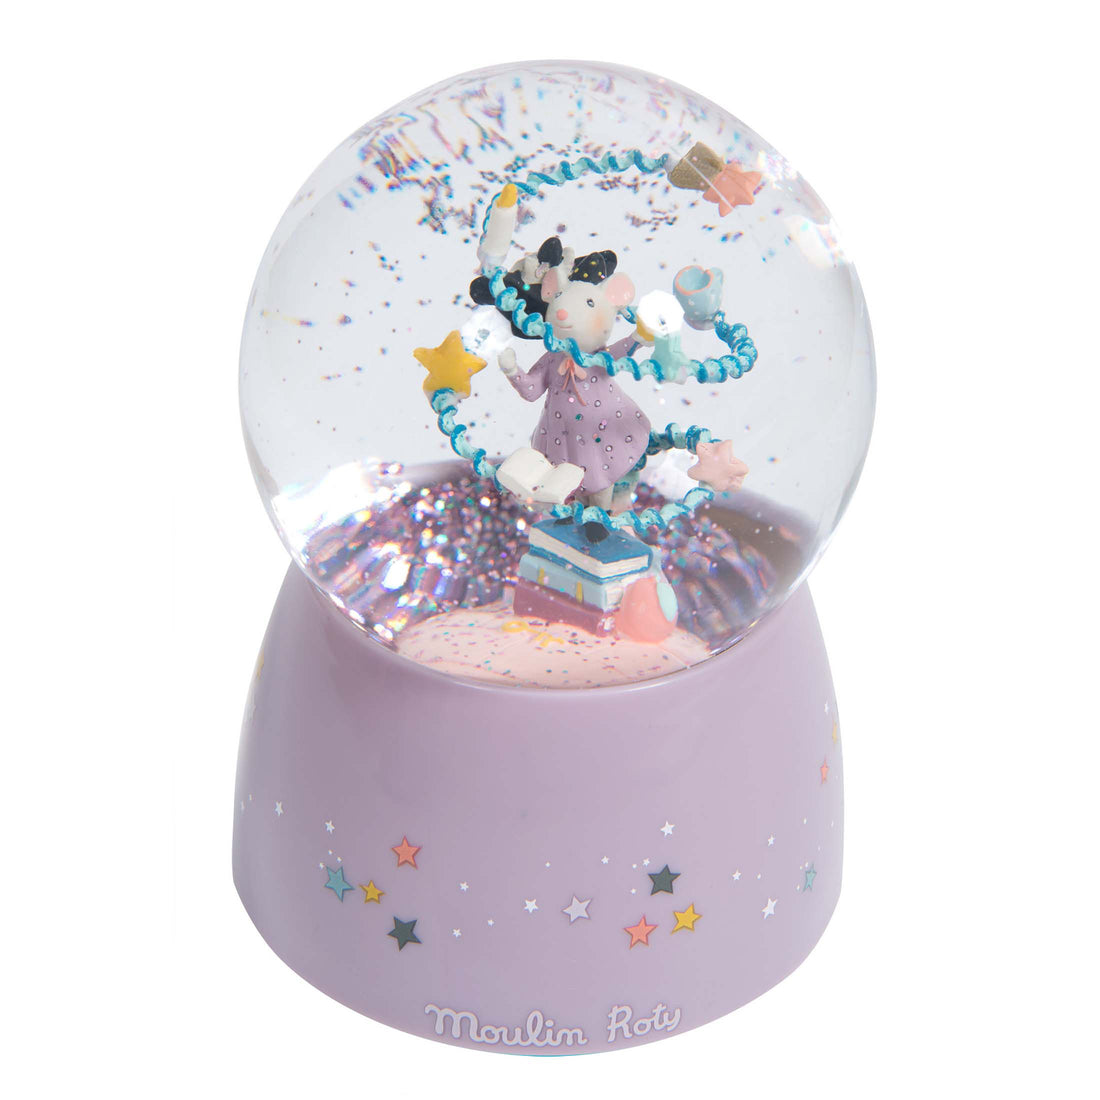 moulin-roty-il-etait-une-fois-musical-turning-snow-globe-10x15cm-moul-664241